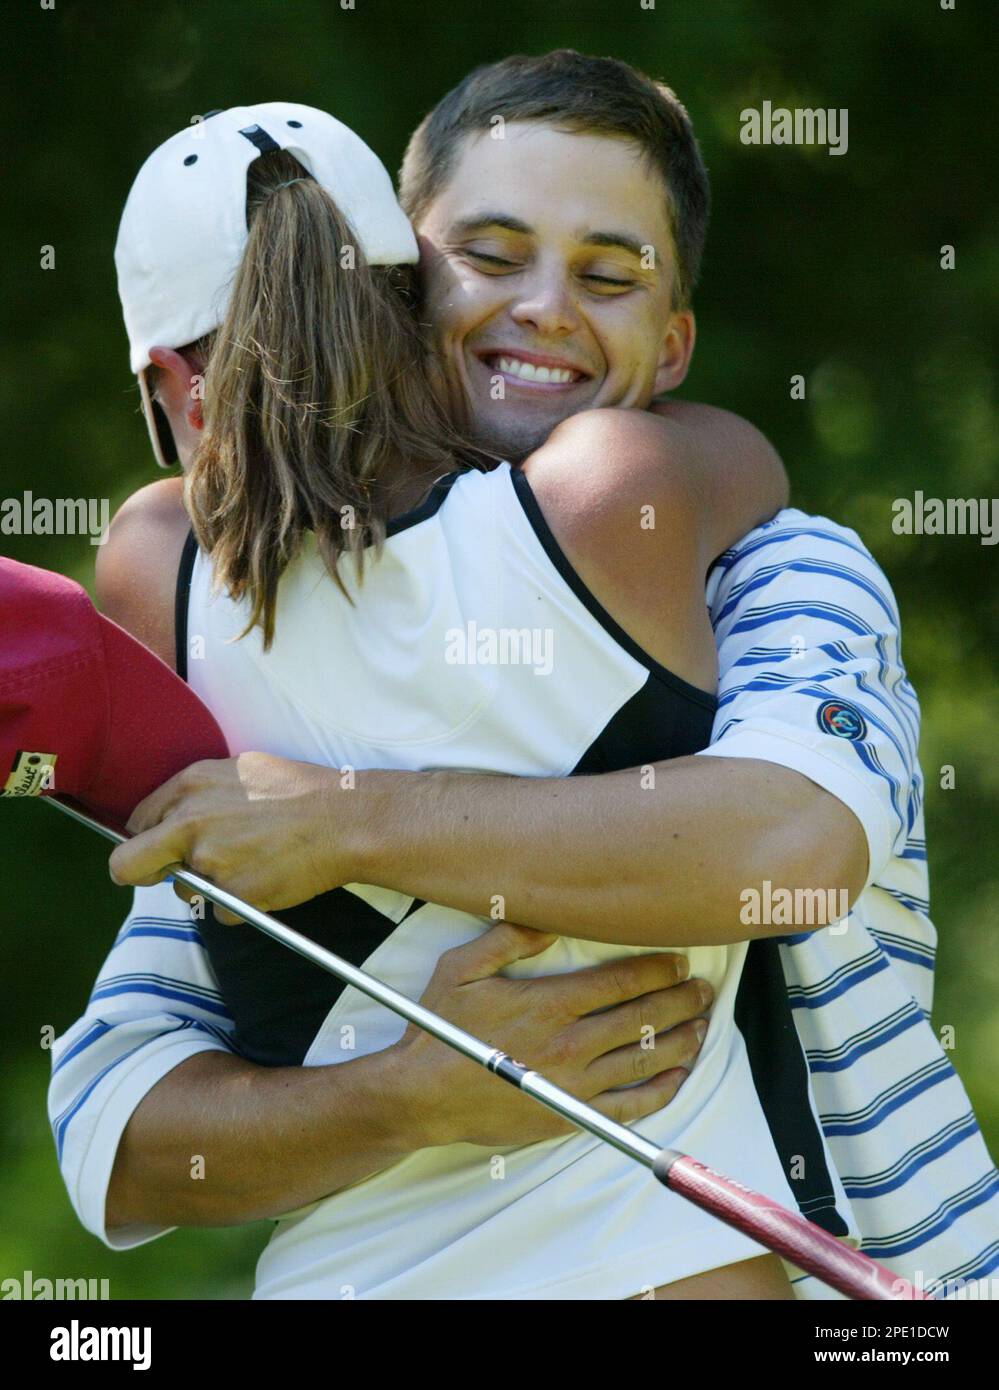 https://c8.alamy.com/comp/2PE1DCW/corey-poulin-right-gets-a-hug-from-his-sister-and-caddy-crystal-levesque-friday-july-15-2005-after-winning-the-maine-amateur-championship-at-the-boothbay-country-club-in-boothbay-maine-poulin-beat-defending-champion-ricky-jones-after-17-holes-of-match-play-ap-photojoel-page-2PE1DCW.jpg